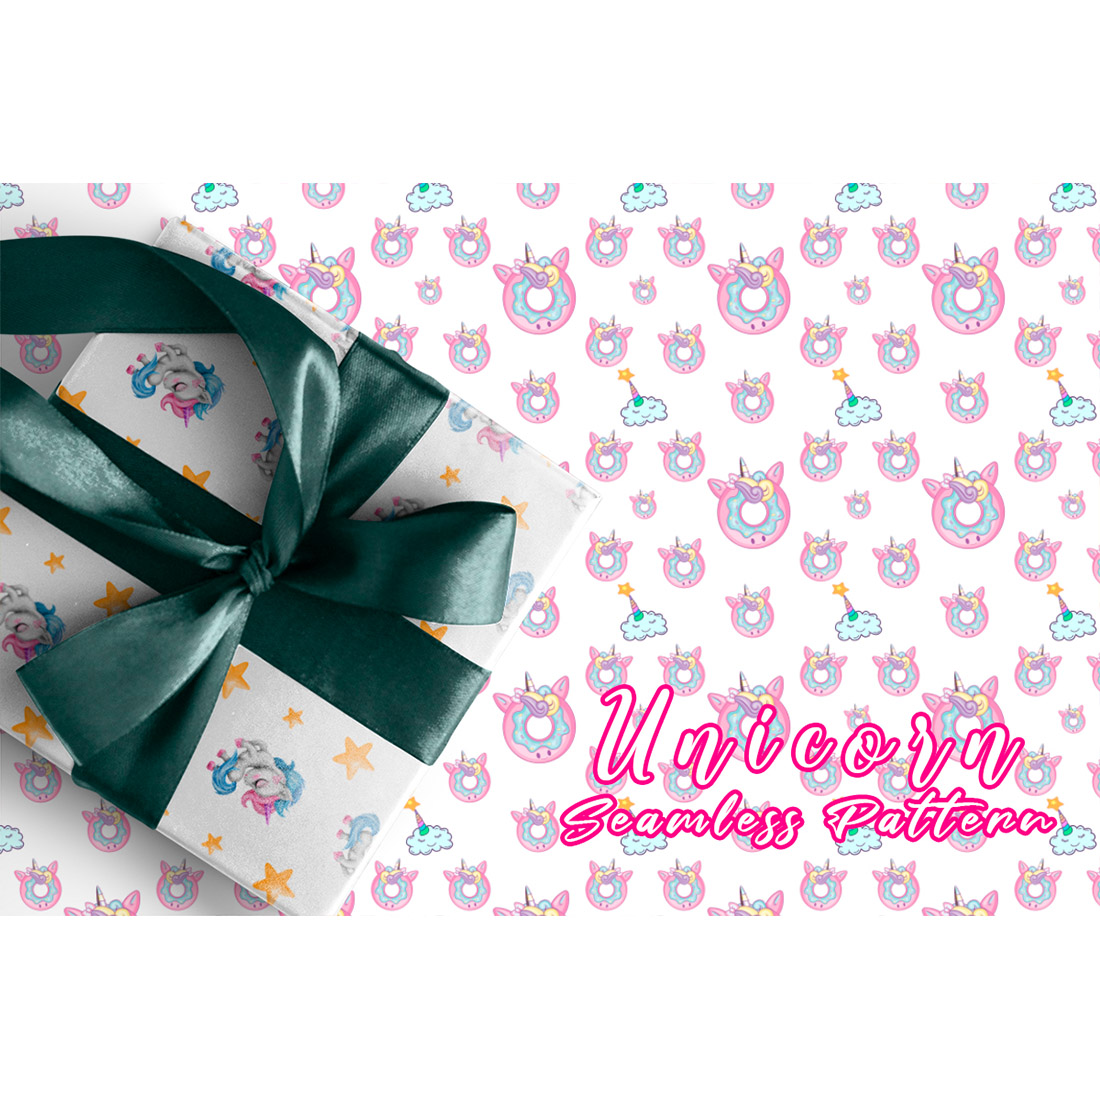 Image of wrapping paper with beautiful unicorn patterns